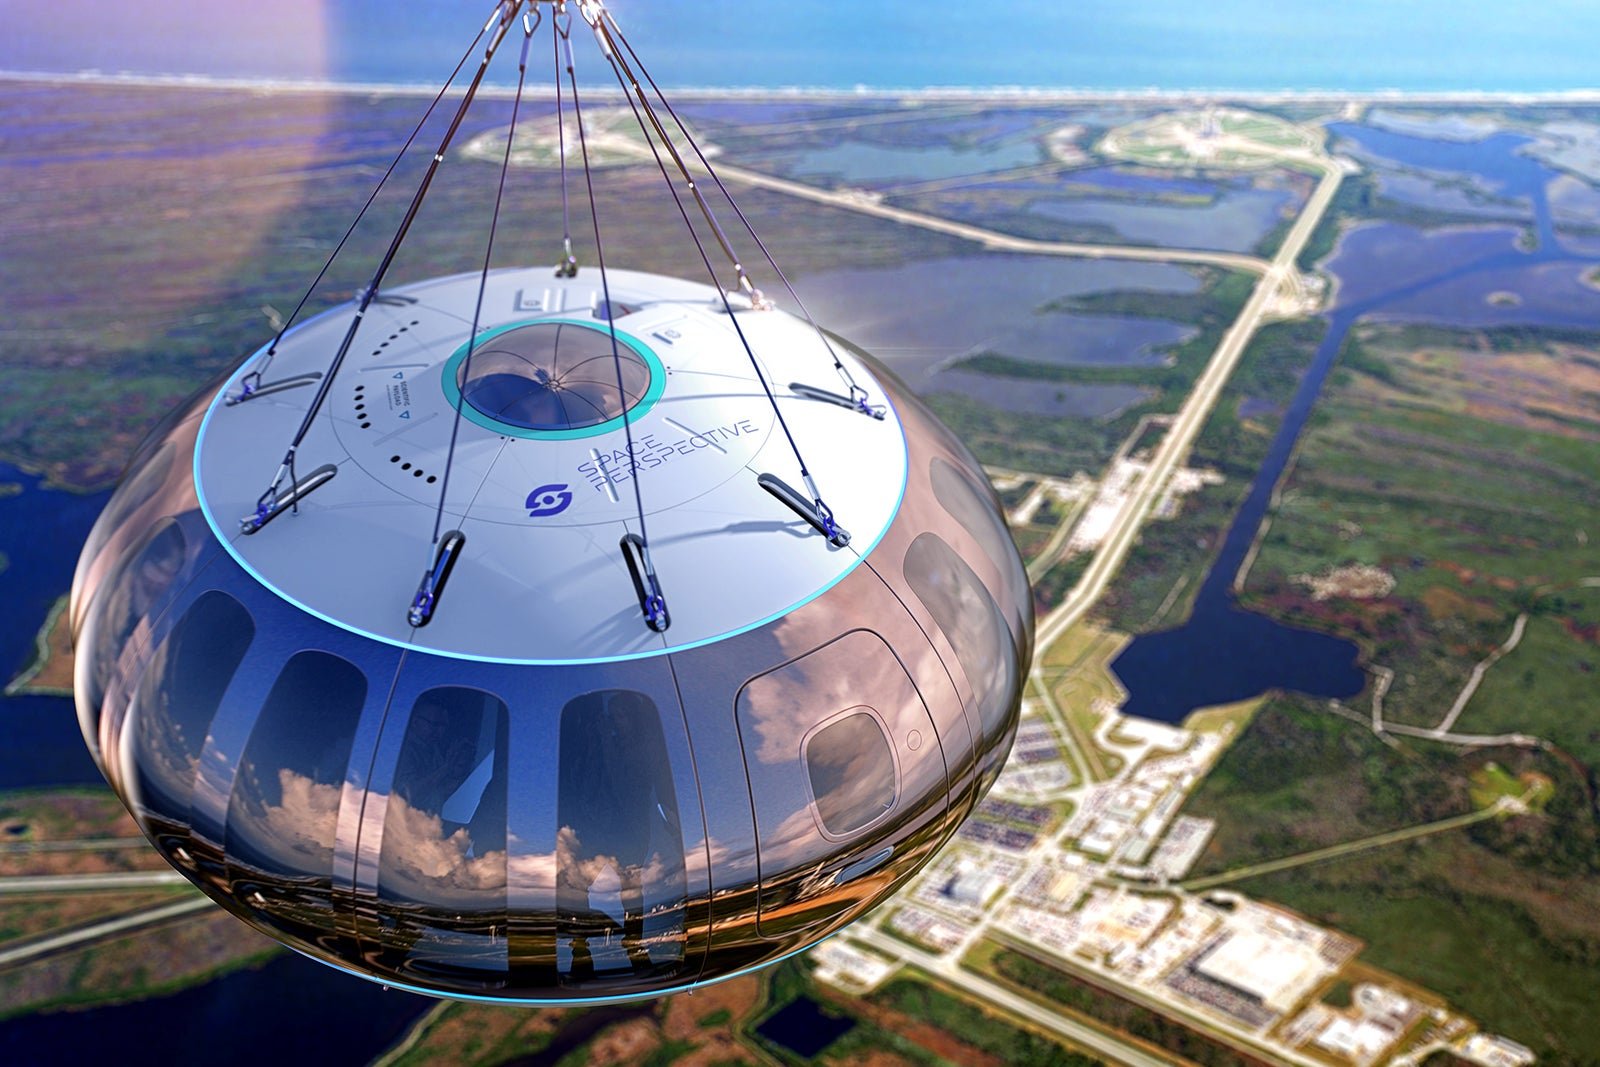 The options for space travel are ballooning